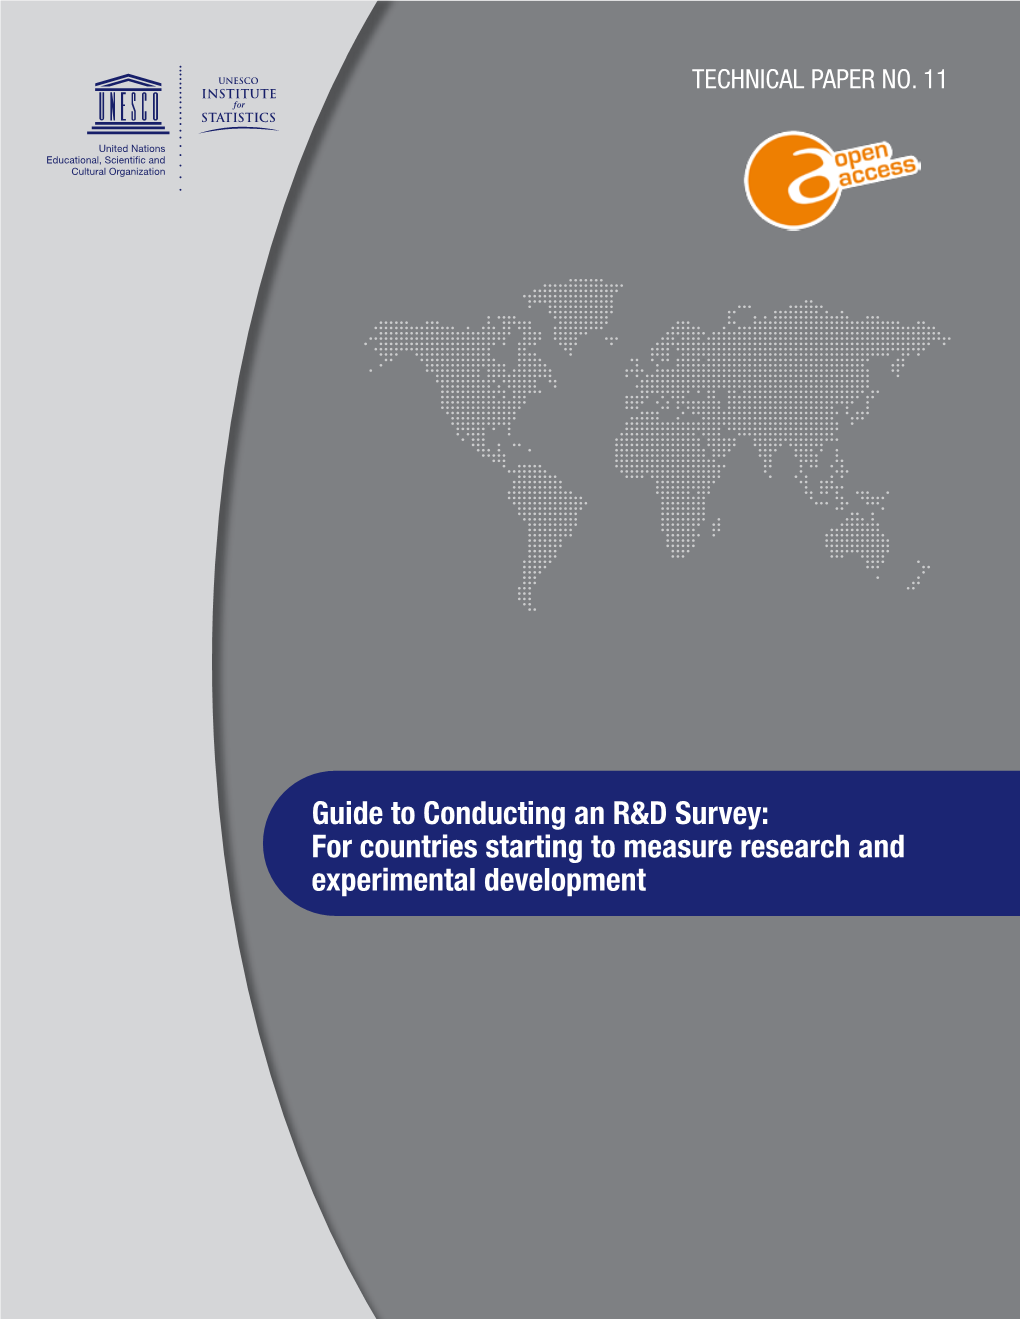 Guide to Conducting an R&D Survey: for Countries Starting to Measure Research and Experimental Development